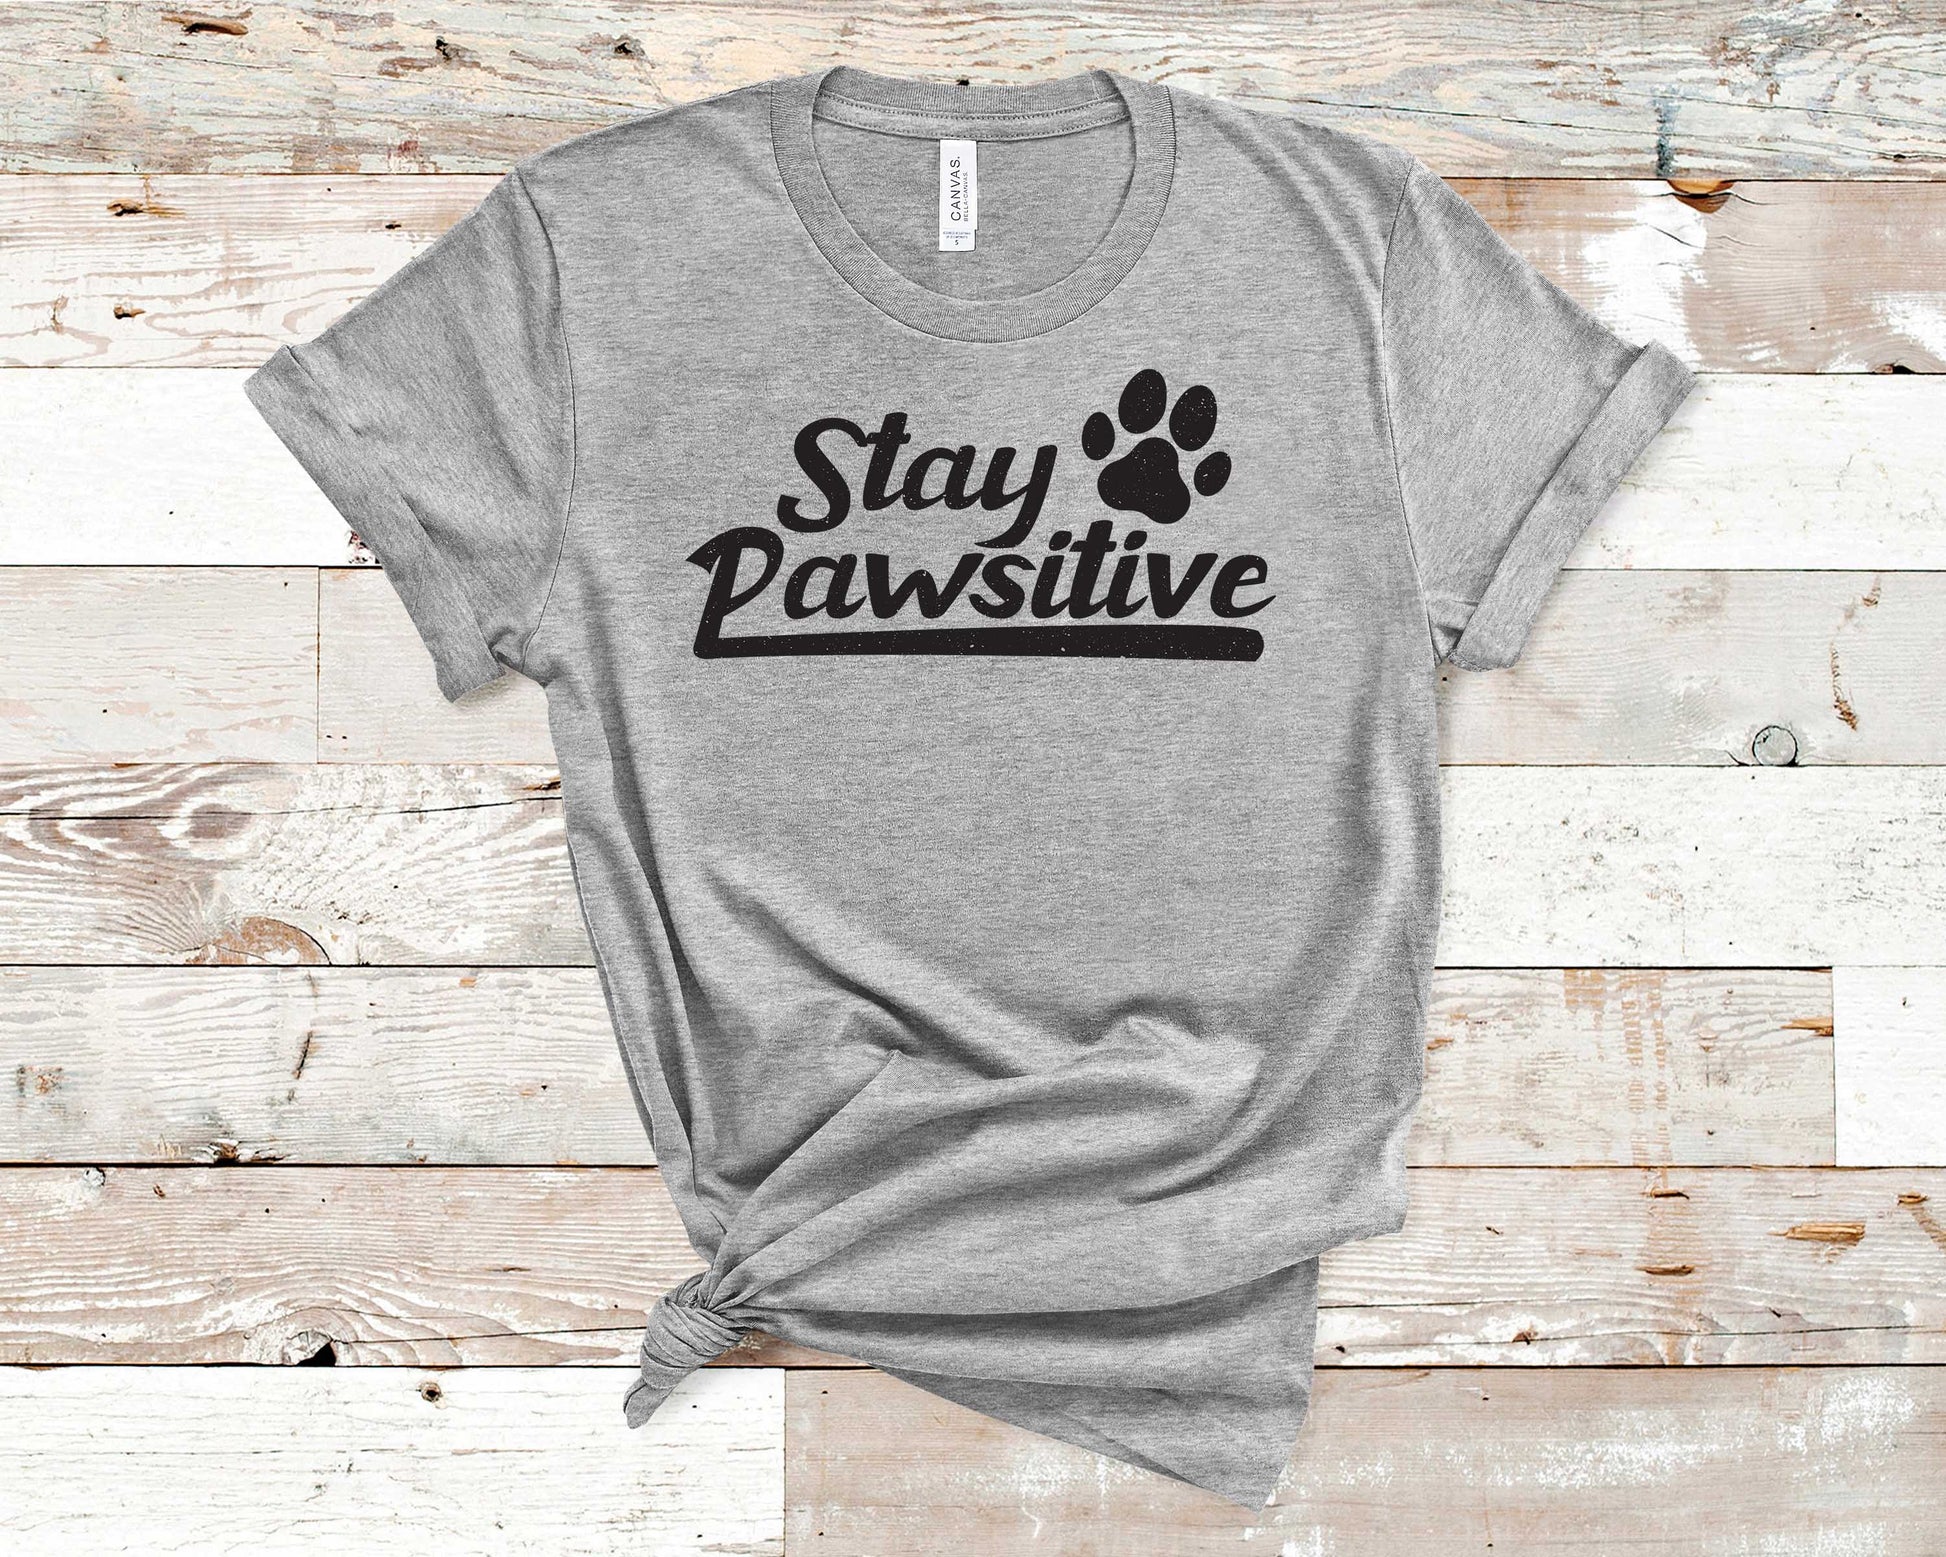 Pet Lovers Tees, Dog Lovers Shirts, Tshirt Gift for Pet Owners, Dog Design T-Shirt